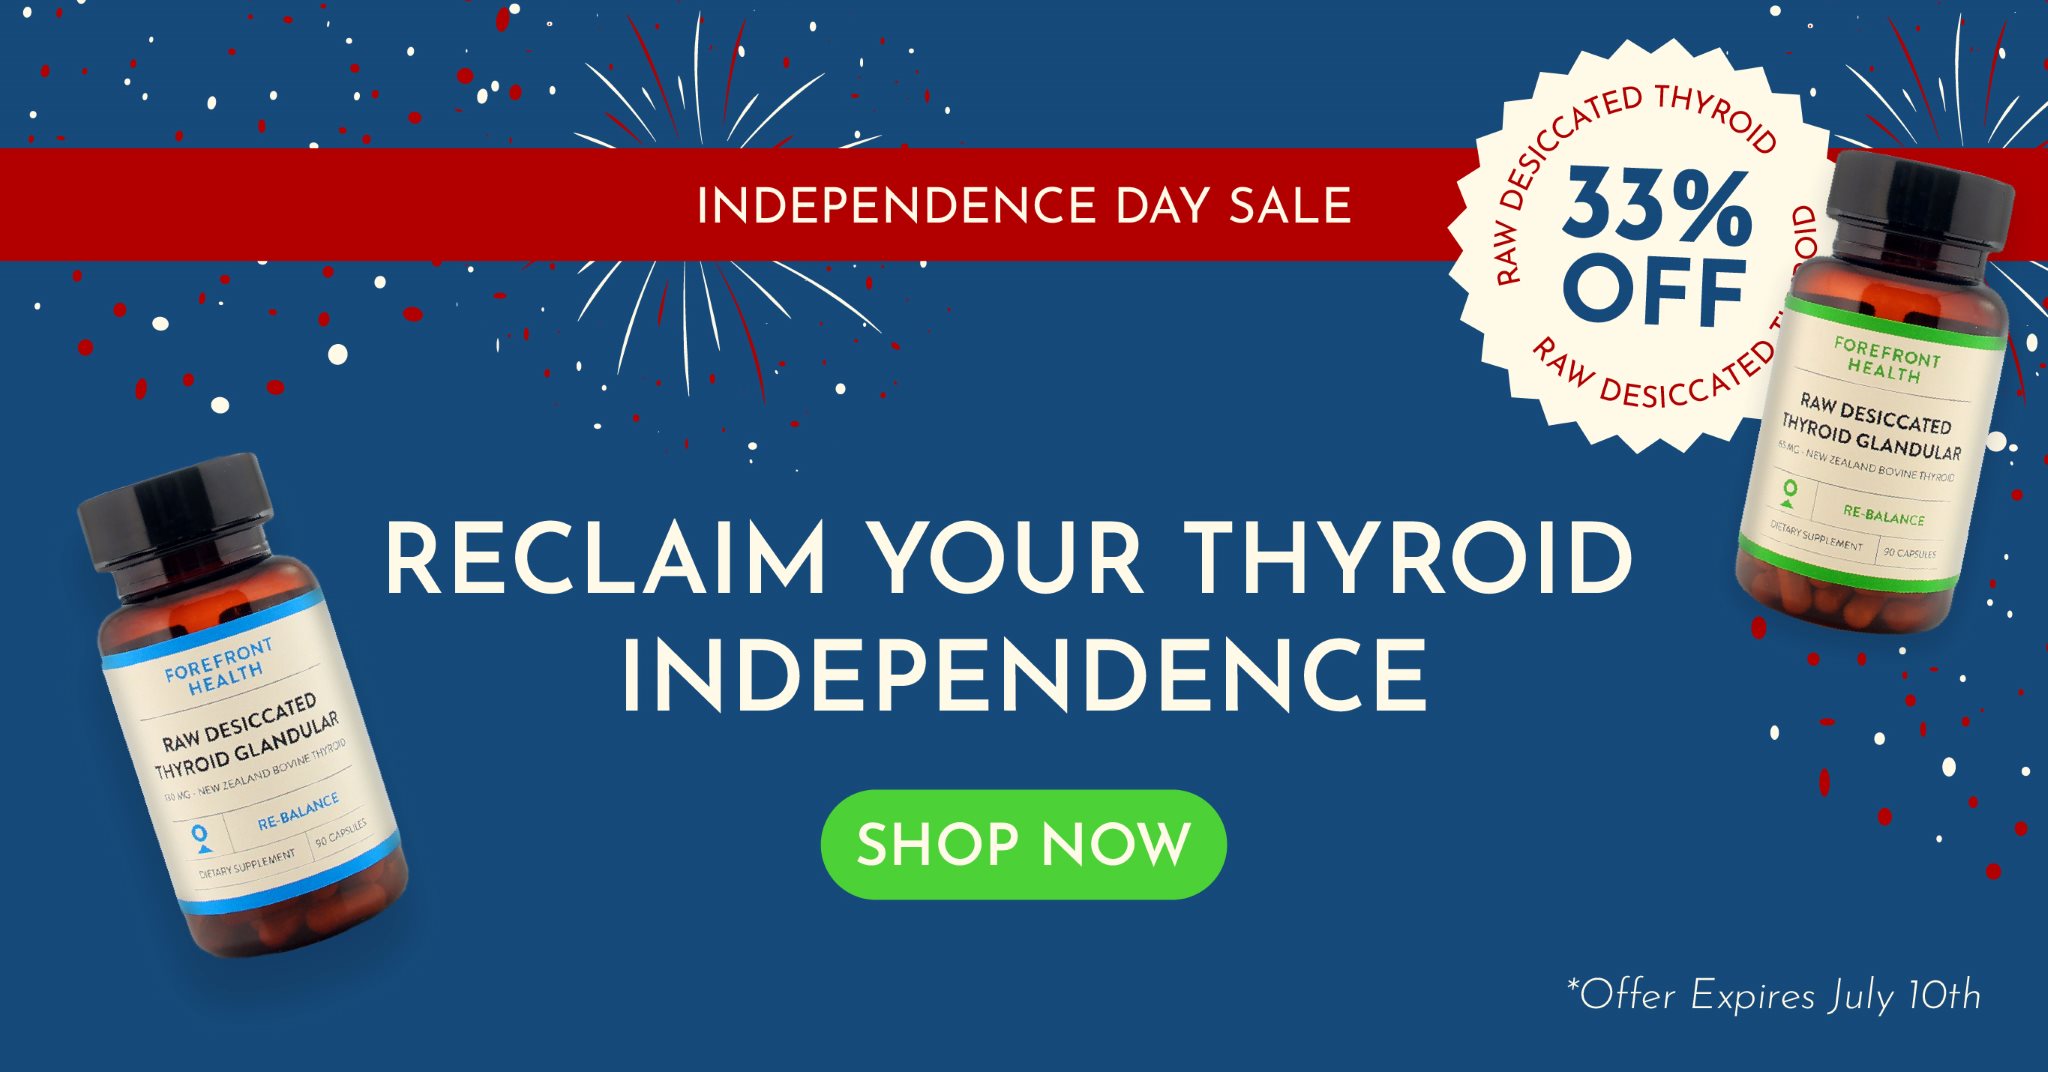 Independence Day Sale | 33% Off Raw Desiccated Thyroid | Reclaim Your Thyroid Indepdence